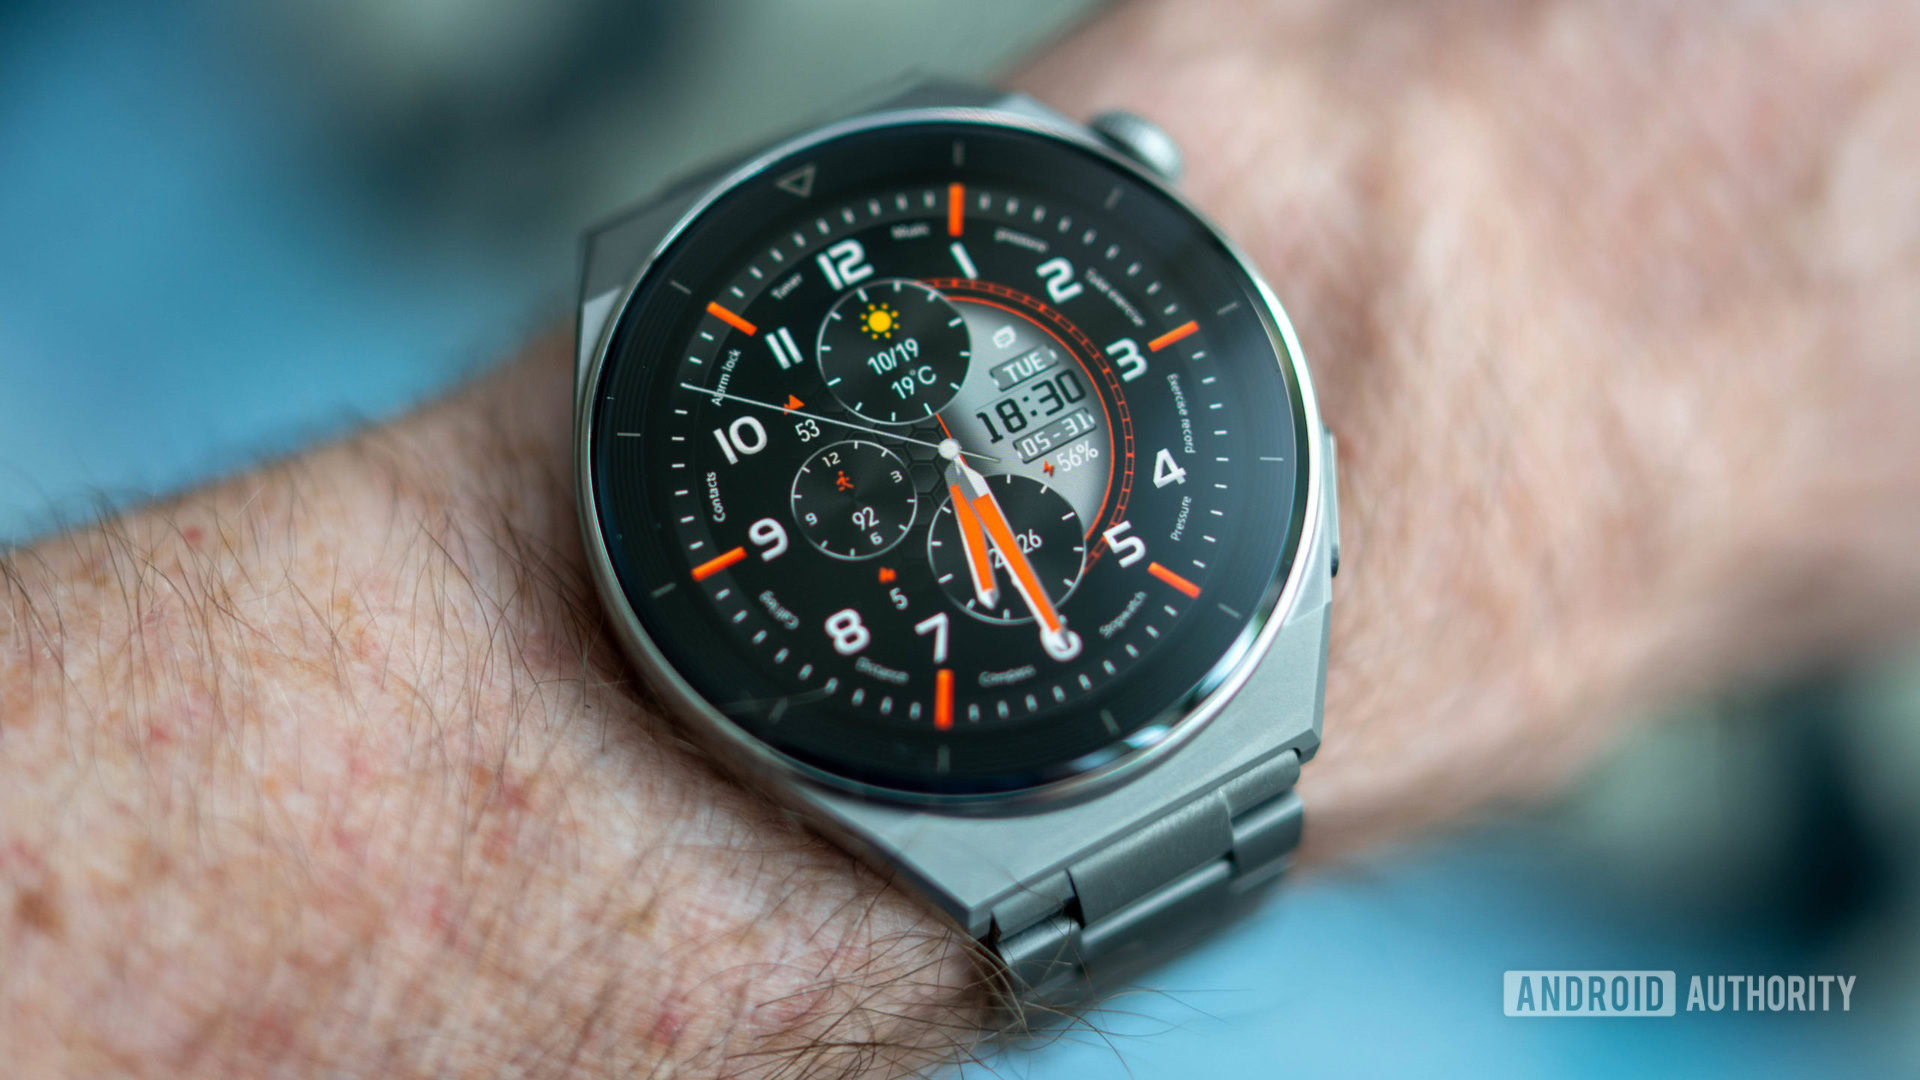 HUAWEI Watch GT 3 Pro review: Titanium, ceramic, and compromises